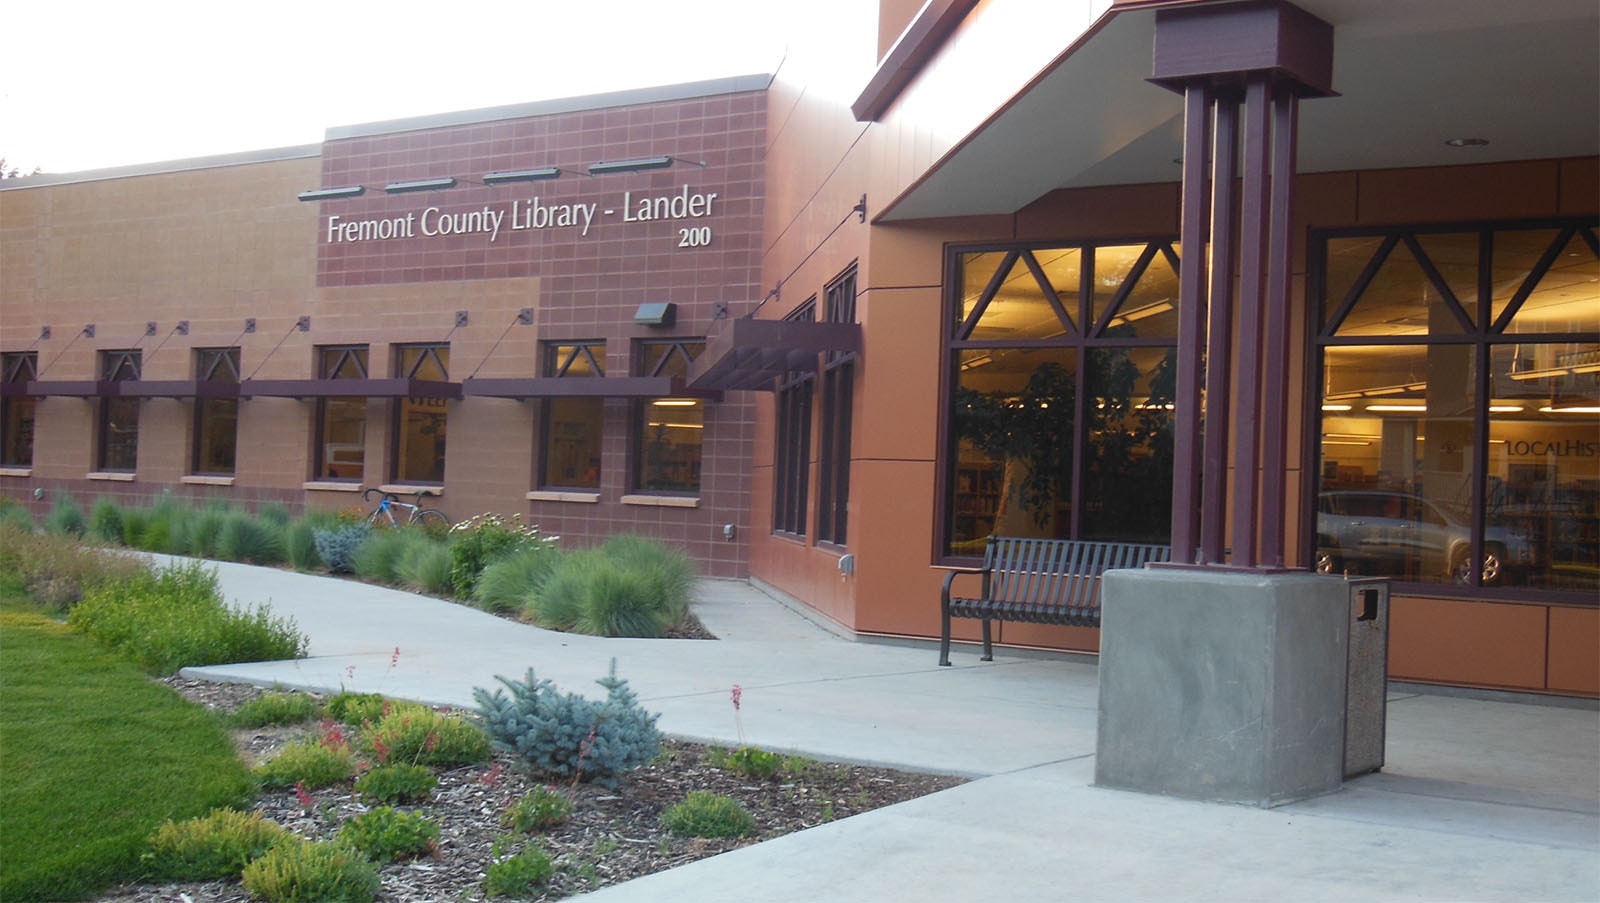 The Lander branch of the Fremont County Library System.